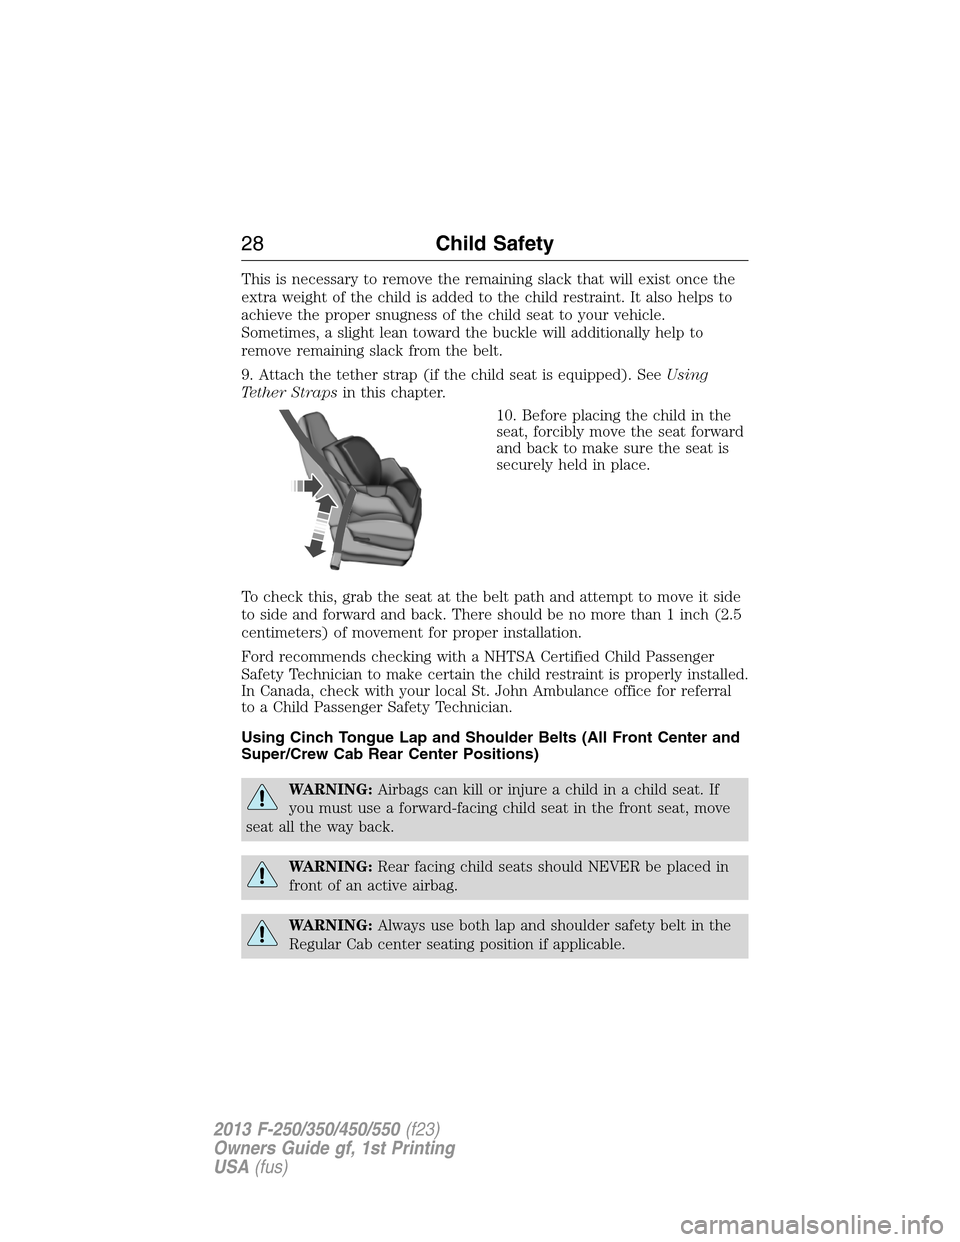 FORD SUPER DUTY 2013 3.G Owners Manual This is necessary to remove the remaining slack that will exist once the
extra weight of the child is added to the child restraint. It also helps to
achieve the proper snugness of the child seat to yo